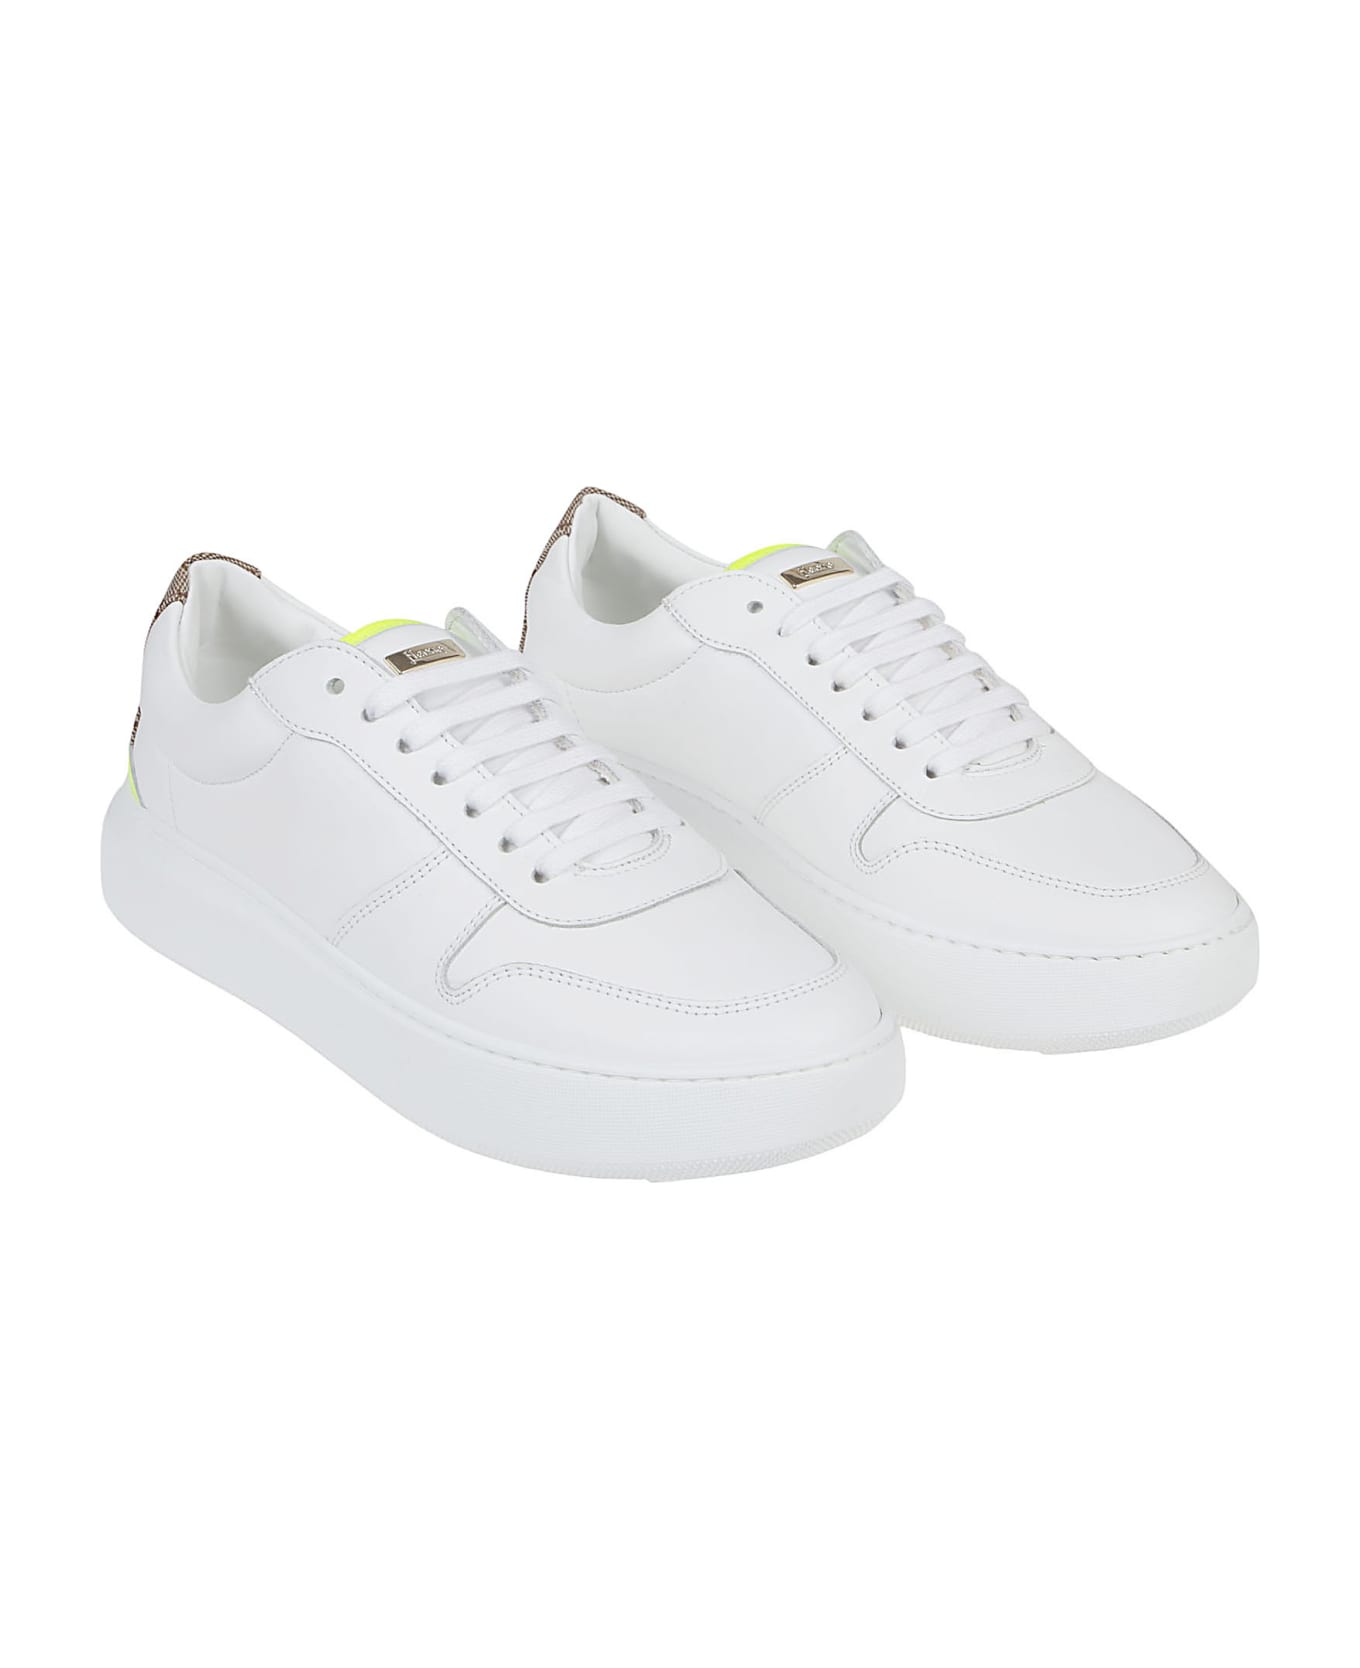 Herno Sneakers - Bianco acido スニーカー